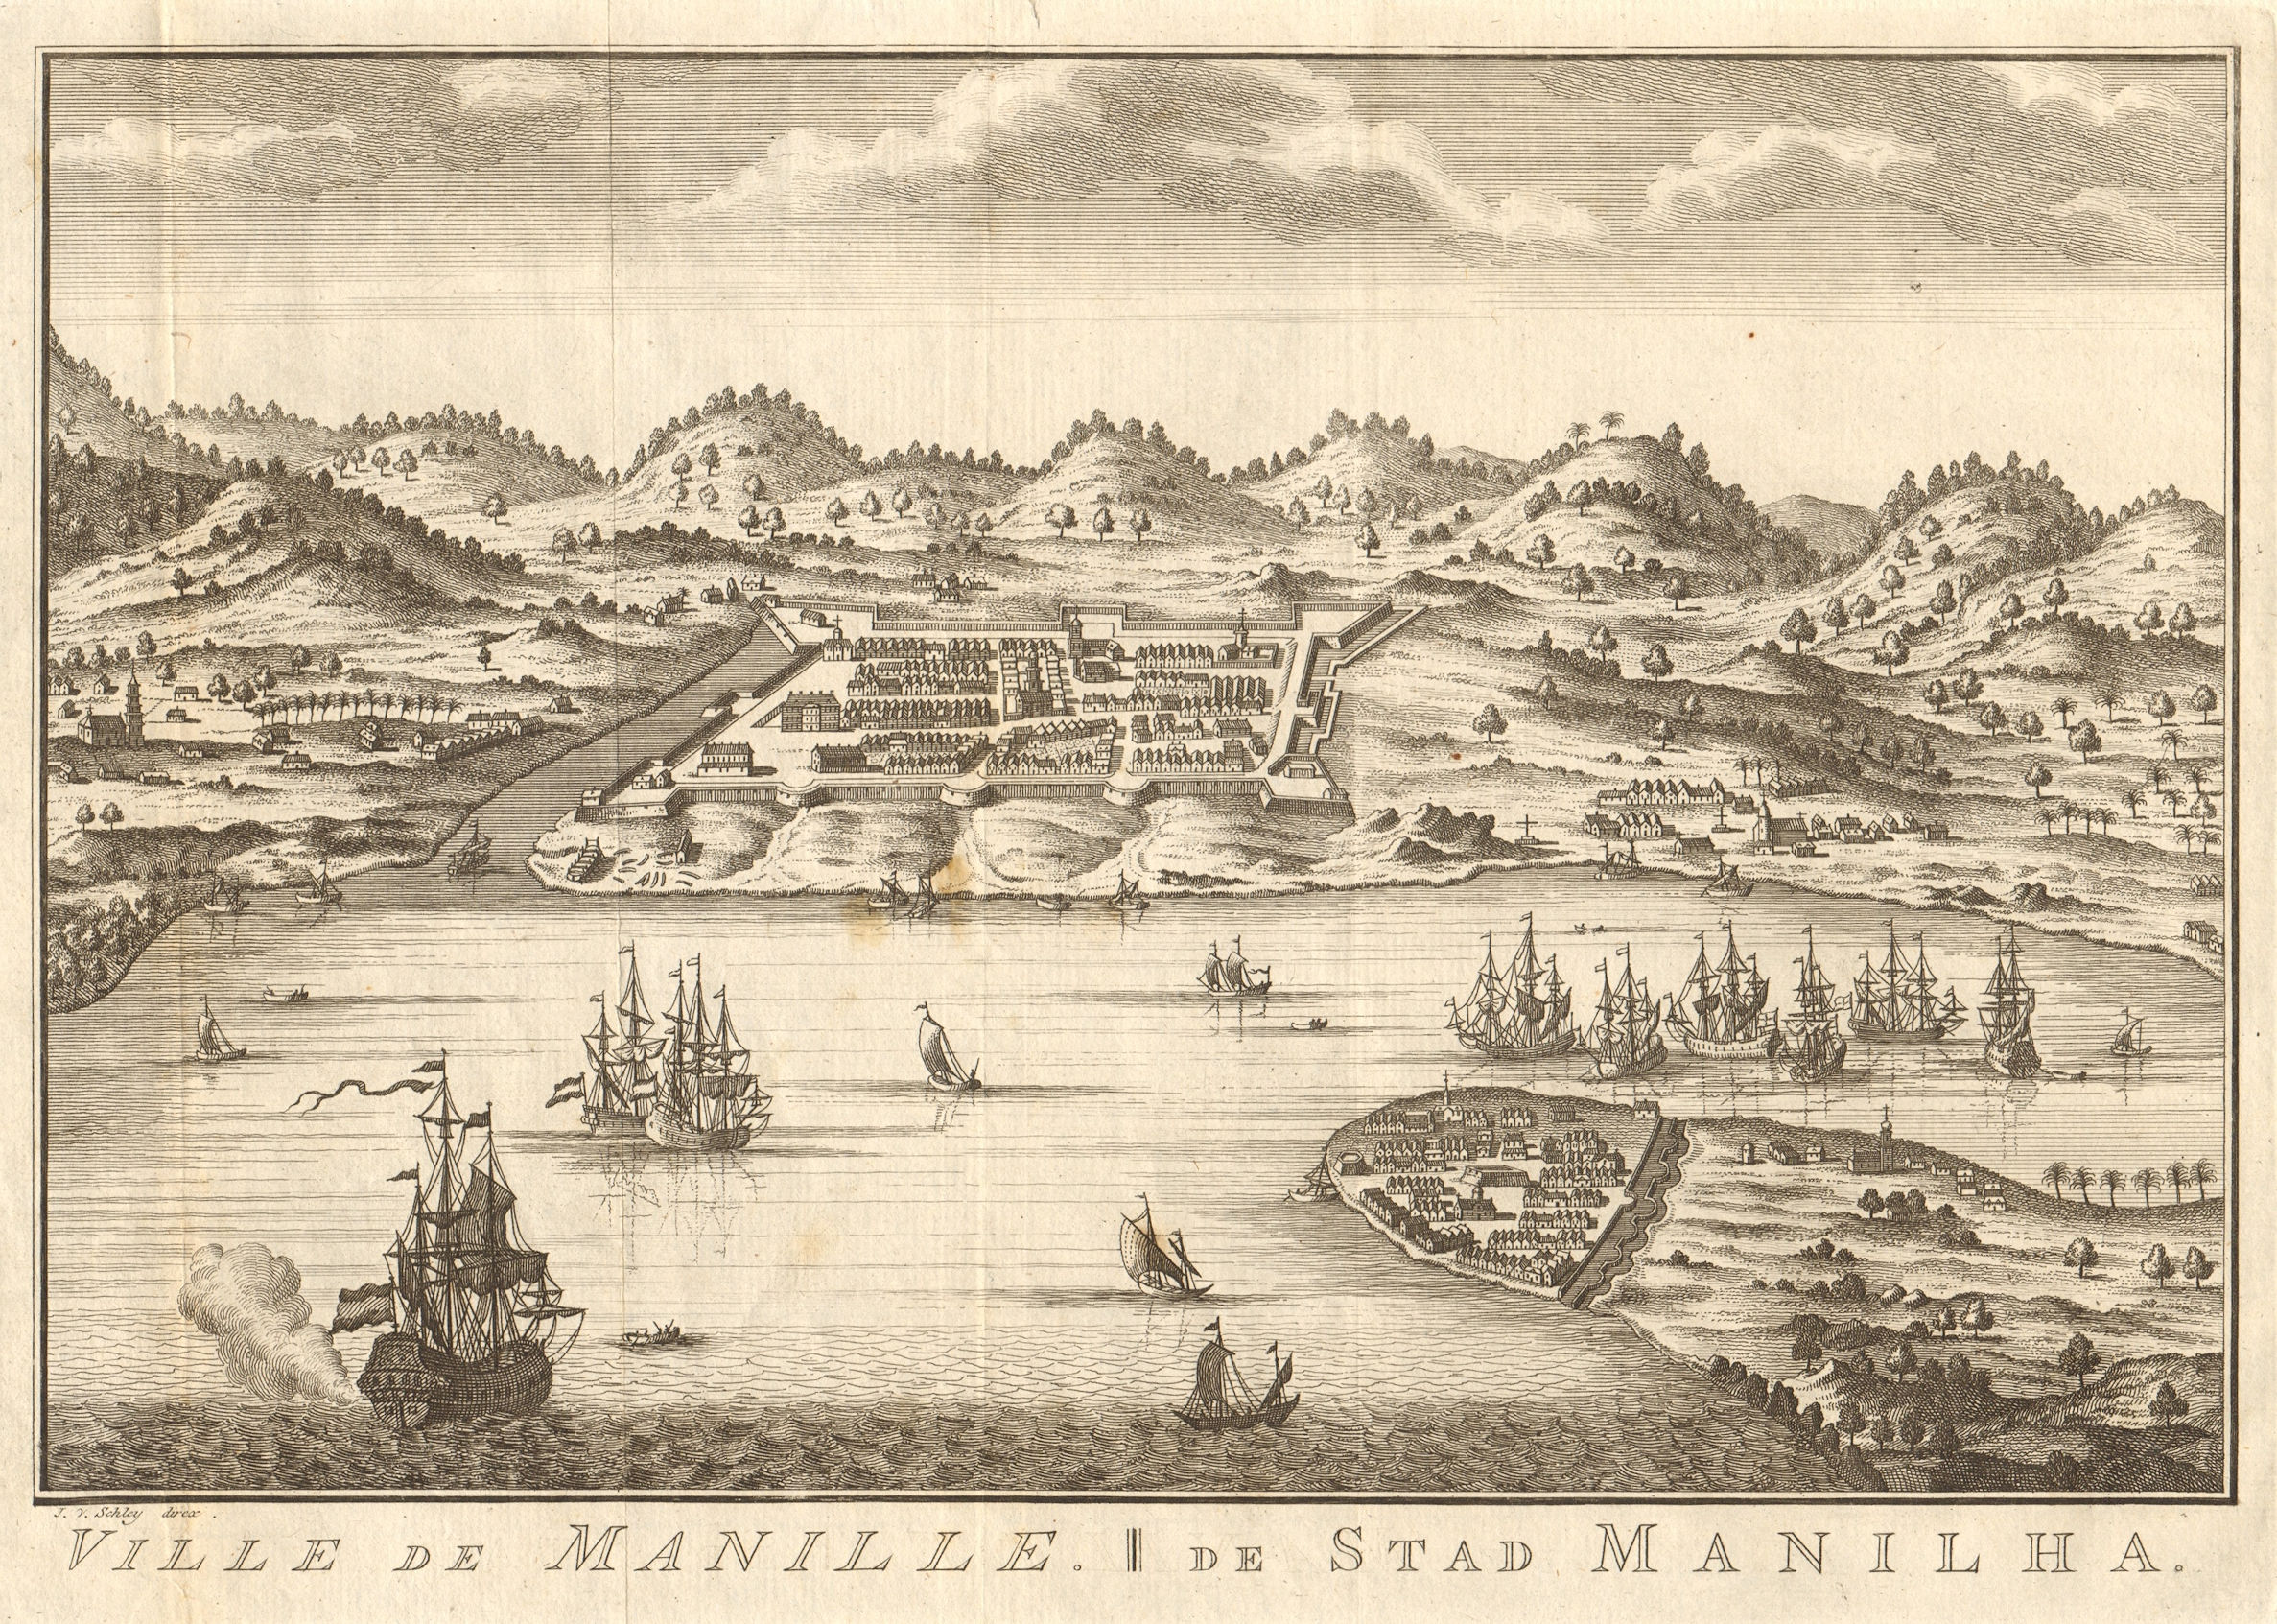 'Ville de Manille'. A view of the city of Manila, Philippines. SCHLEY 1756